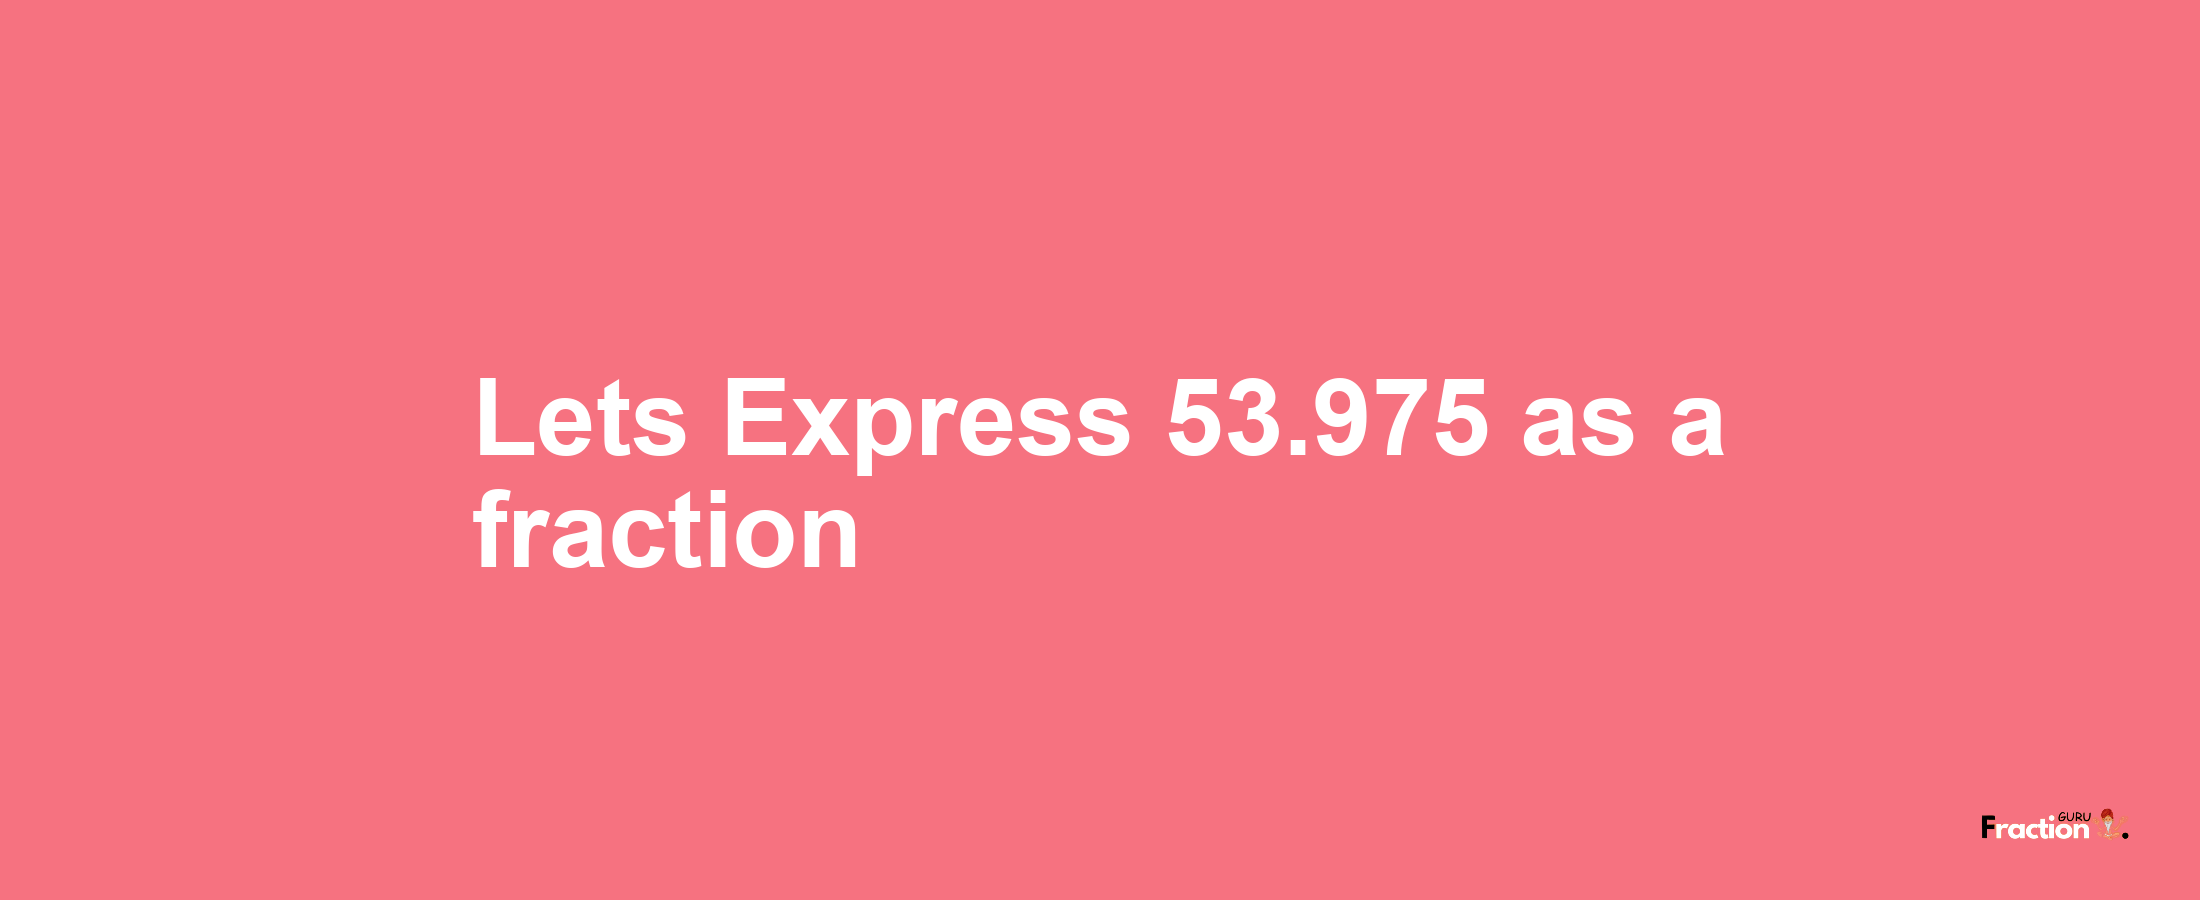 Lets Express 53.975 as afraction